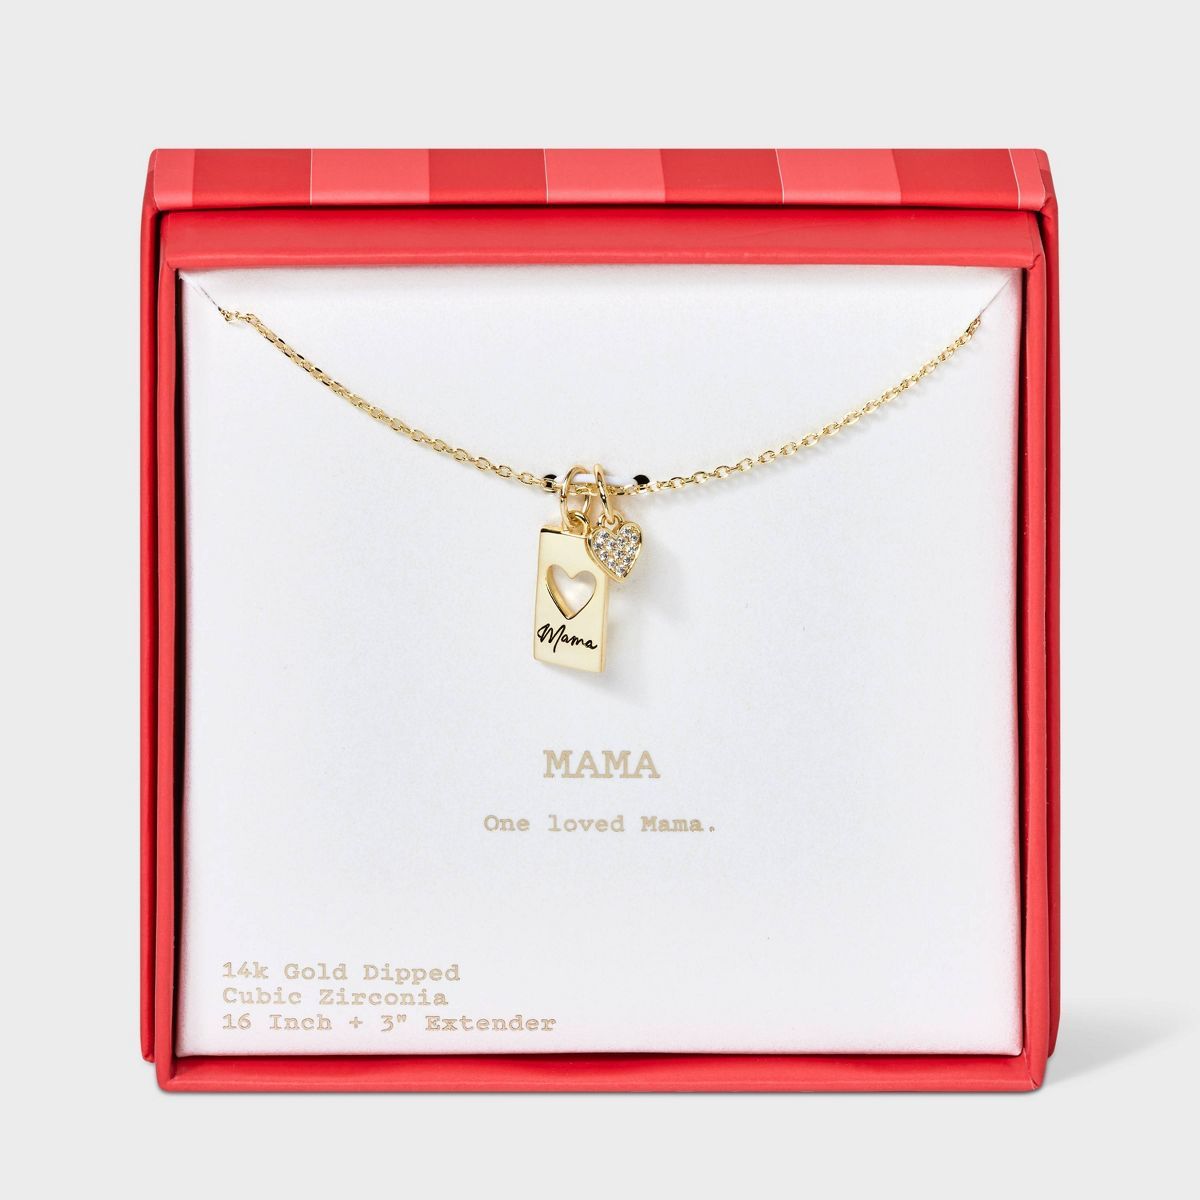 14k Gold Dipped "Mama" Cubic Zirconia Heart Tag Pendant Necklace - A New Day™ Gold | Target